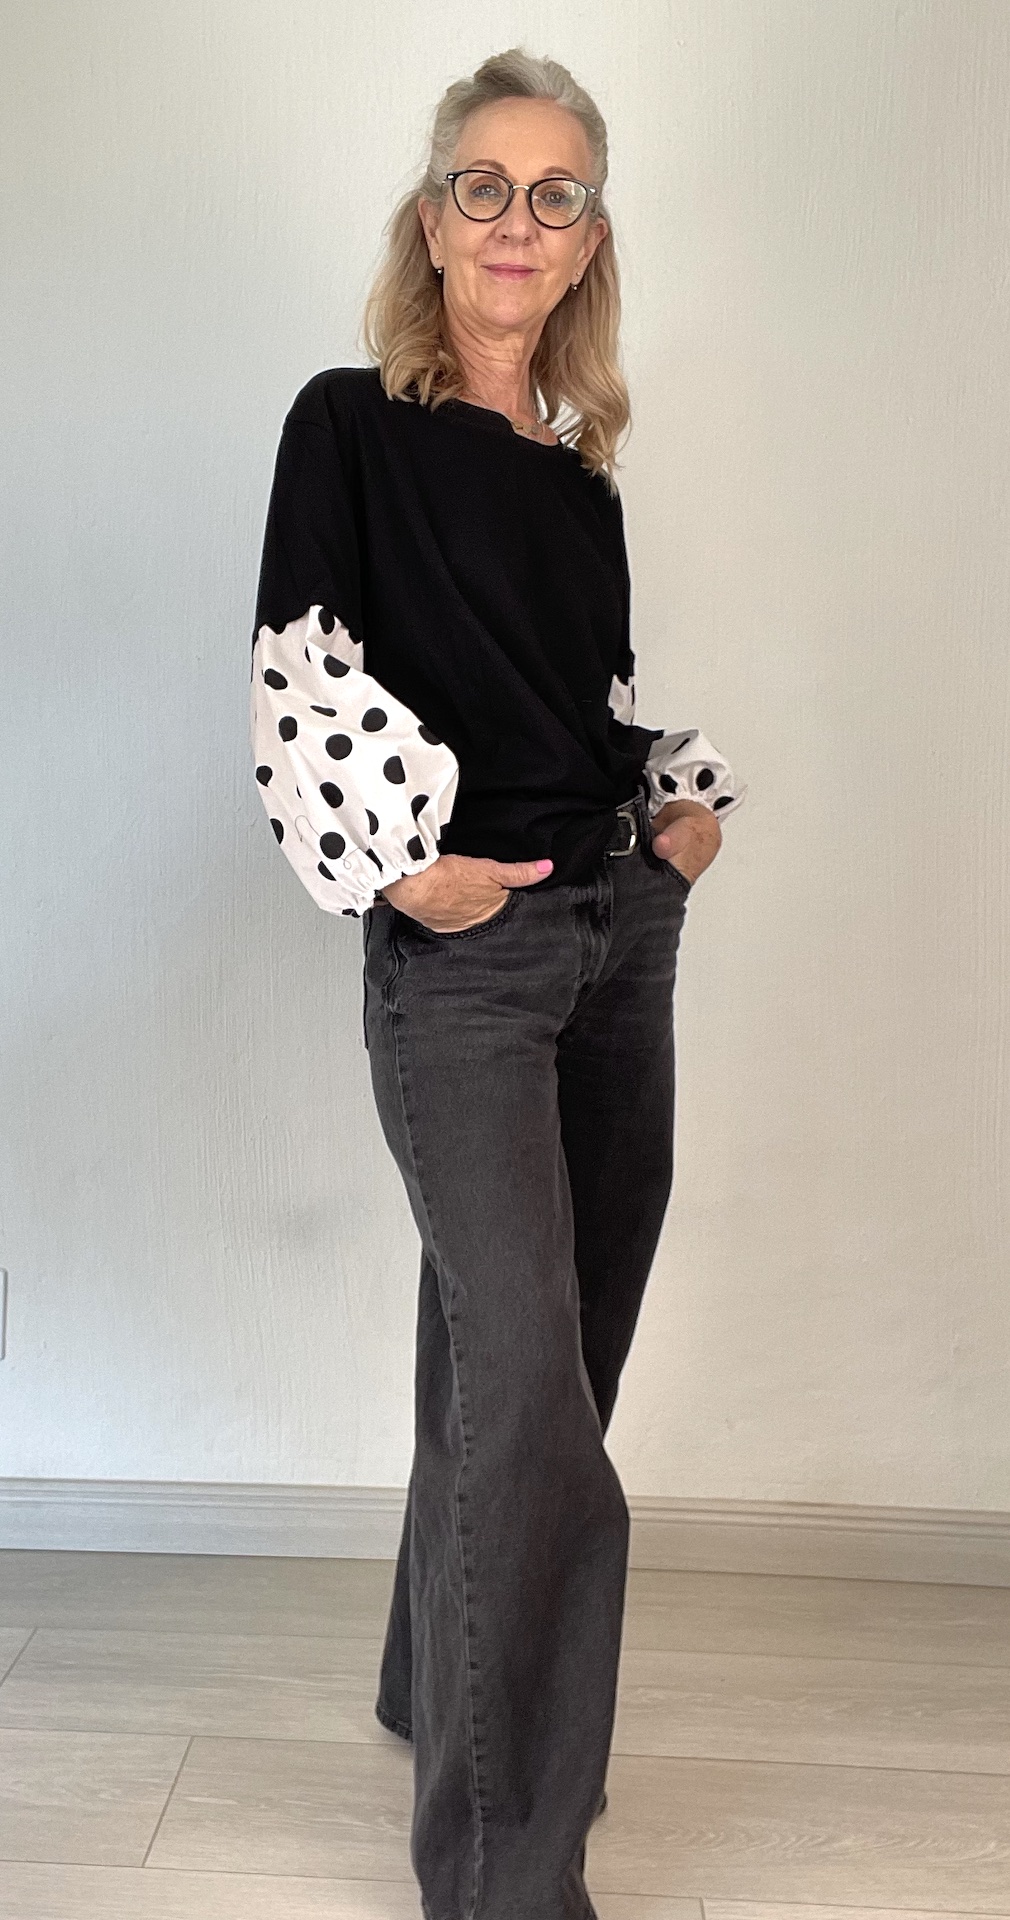 Black T – Style 4 – white and black polka dots